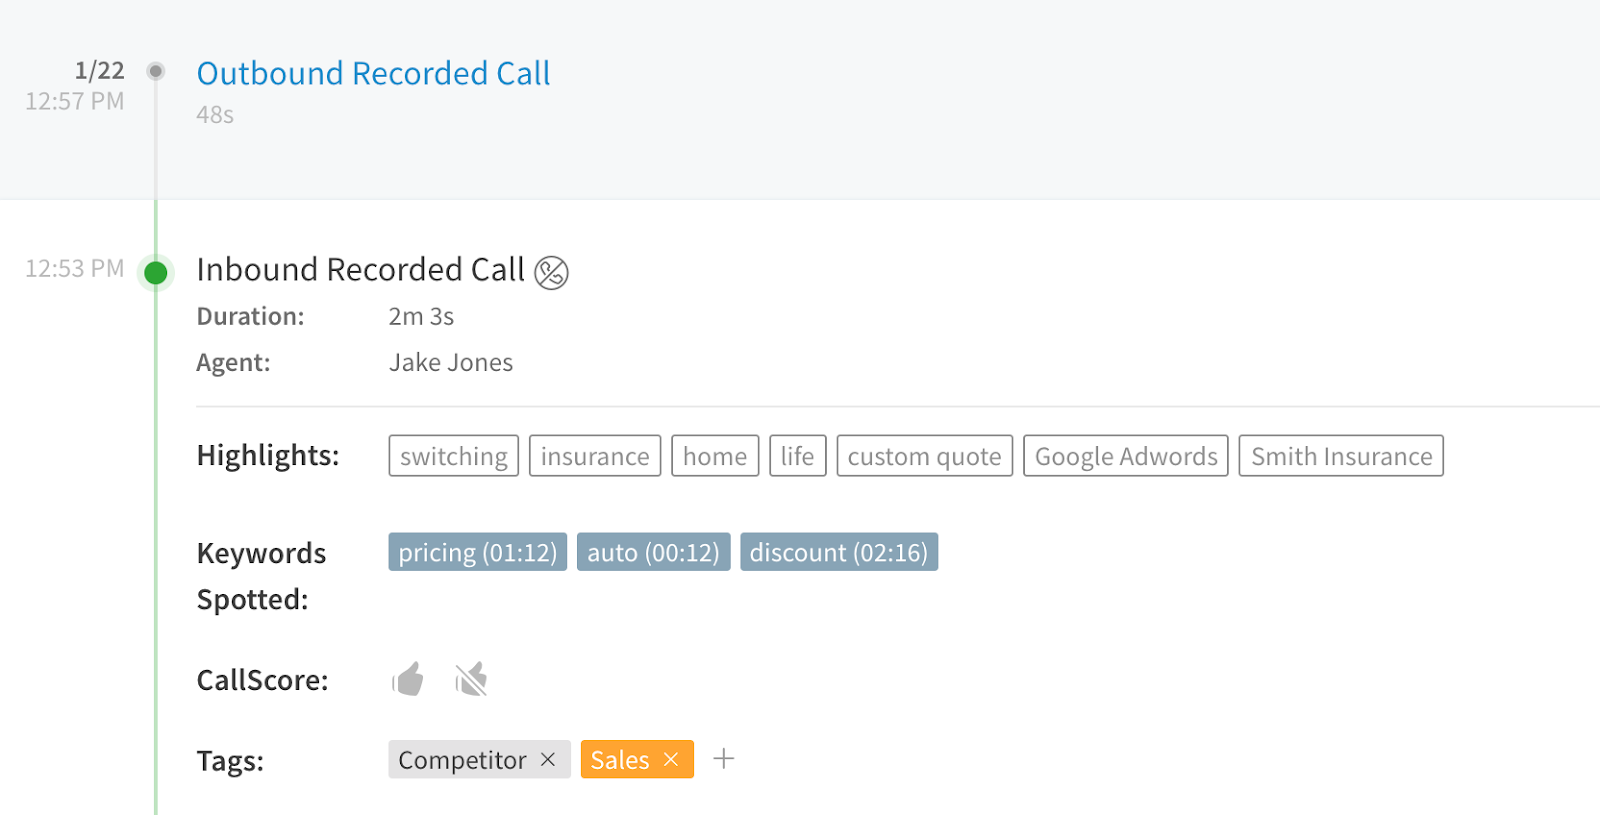 Conversation Intelligence 3 - outbound recorded call